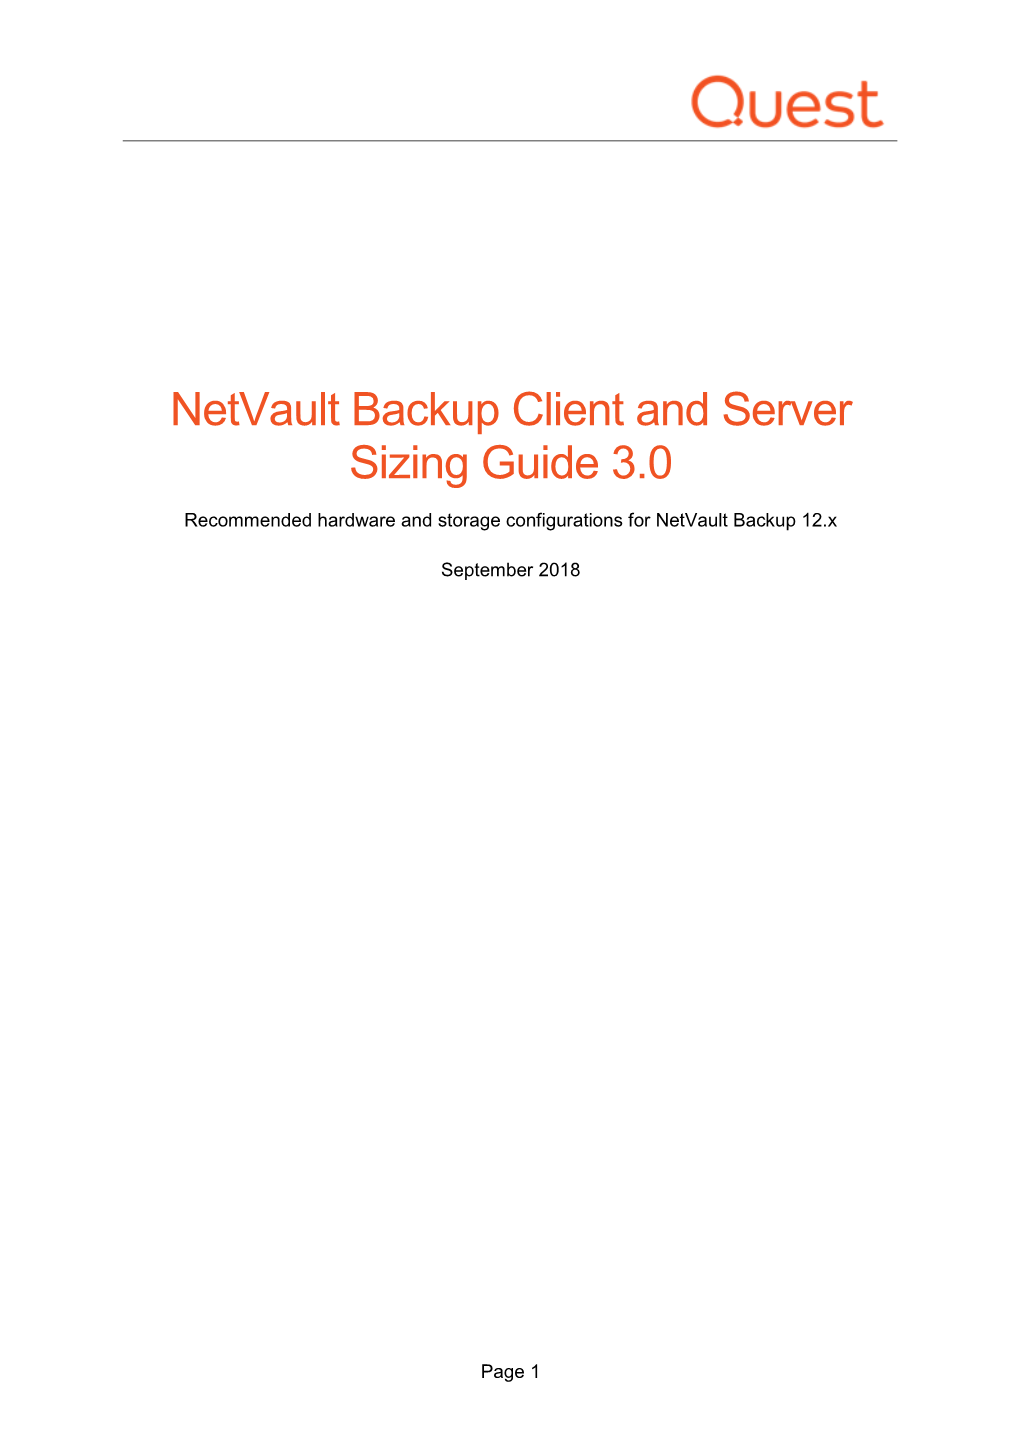 Netvault Backup Client and Server Sizing Guide 3.0